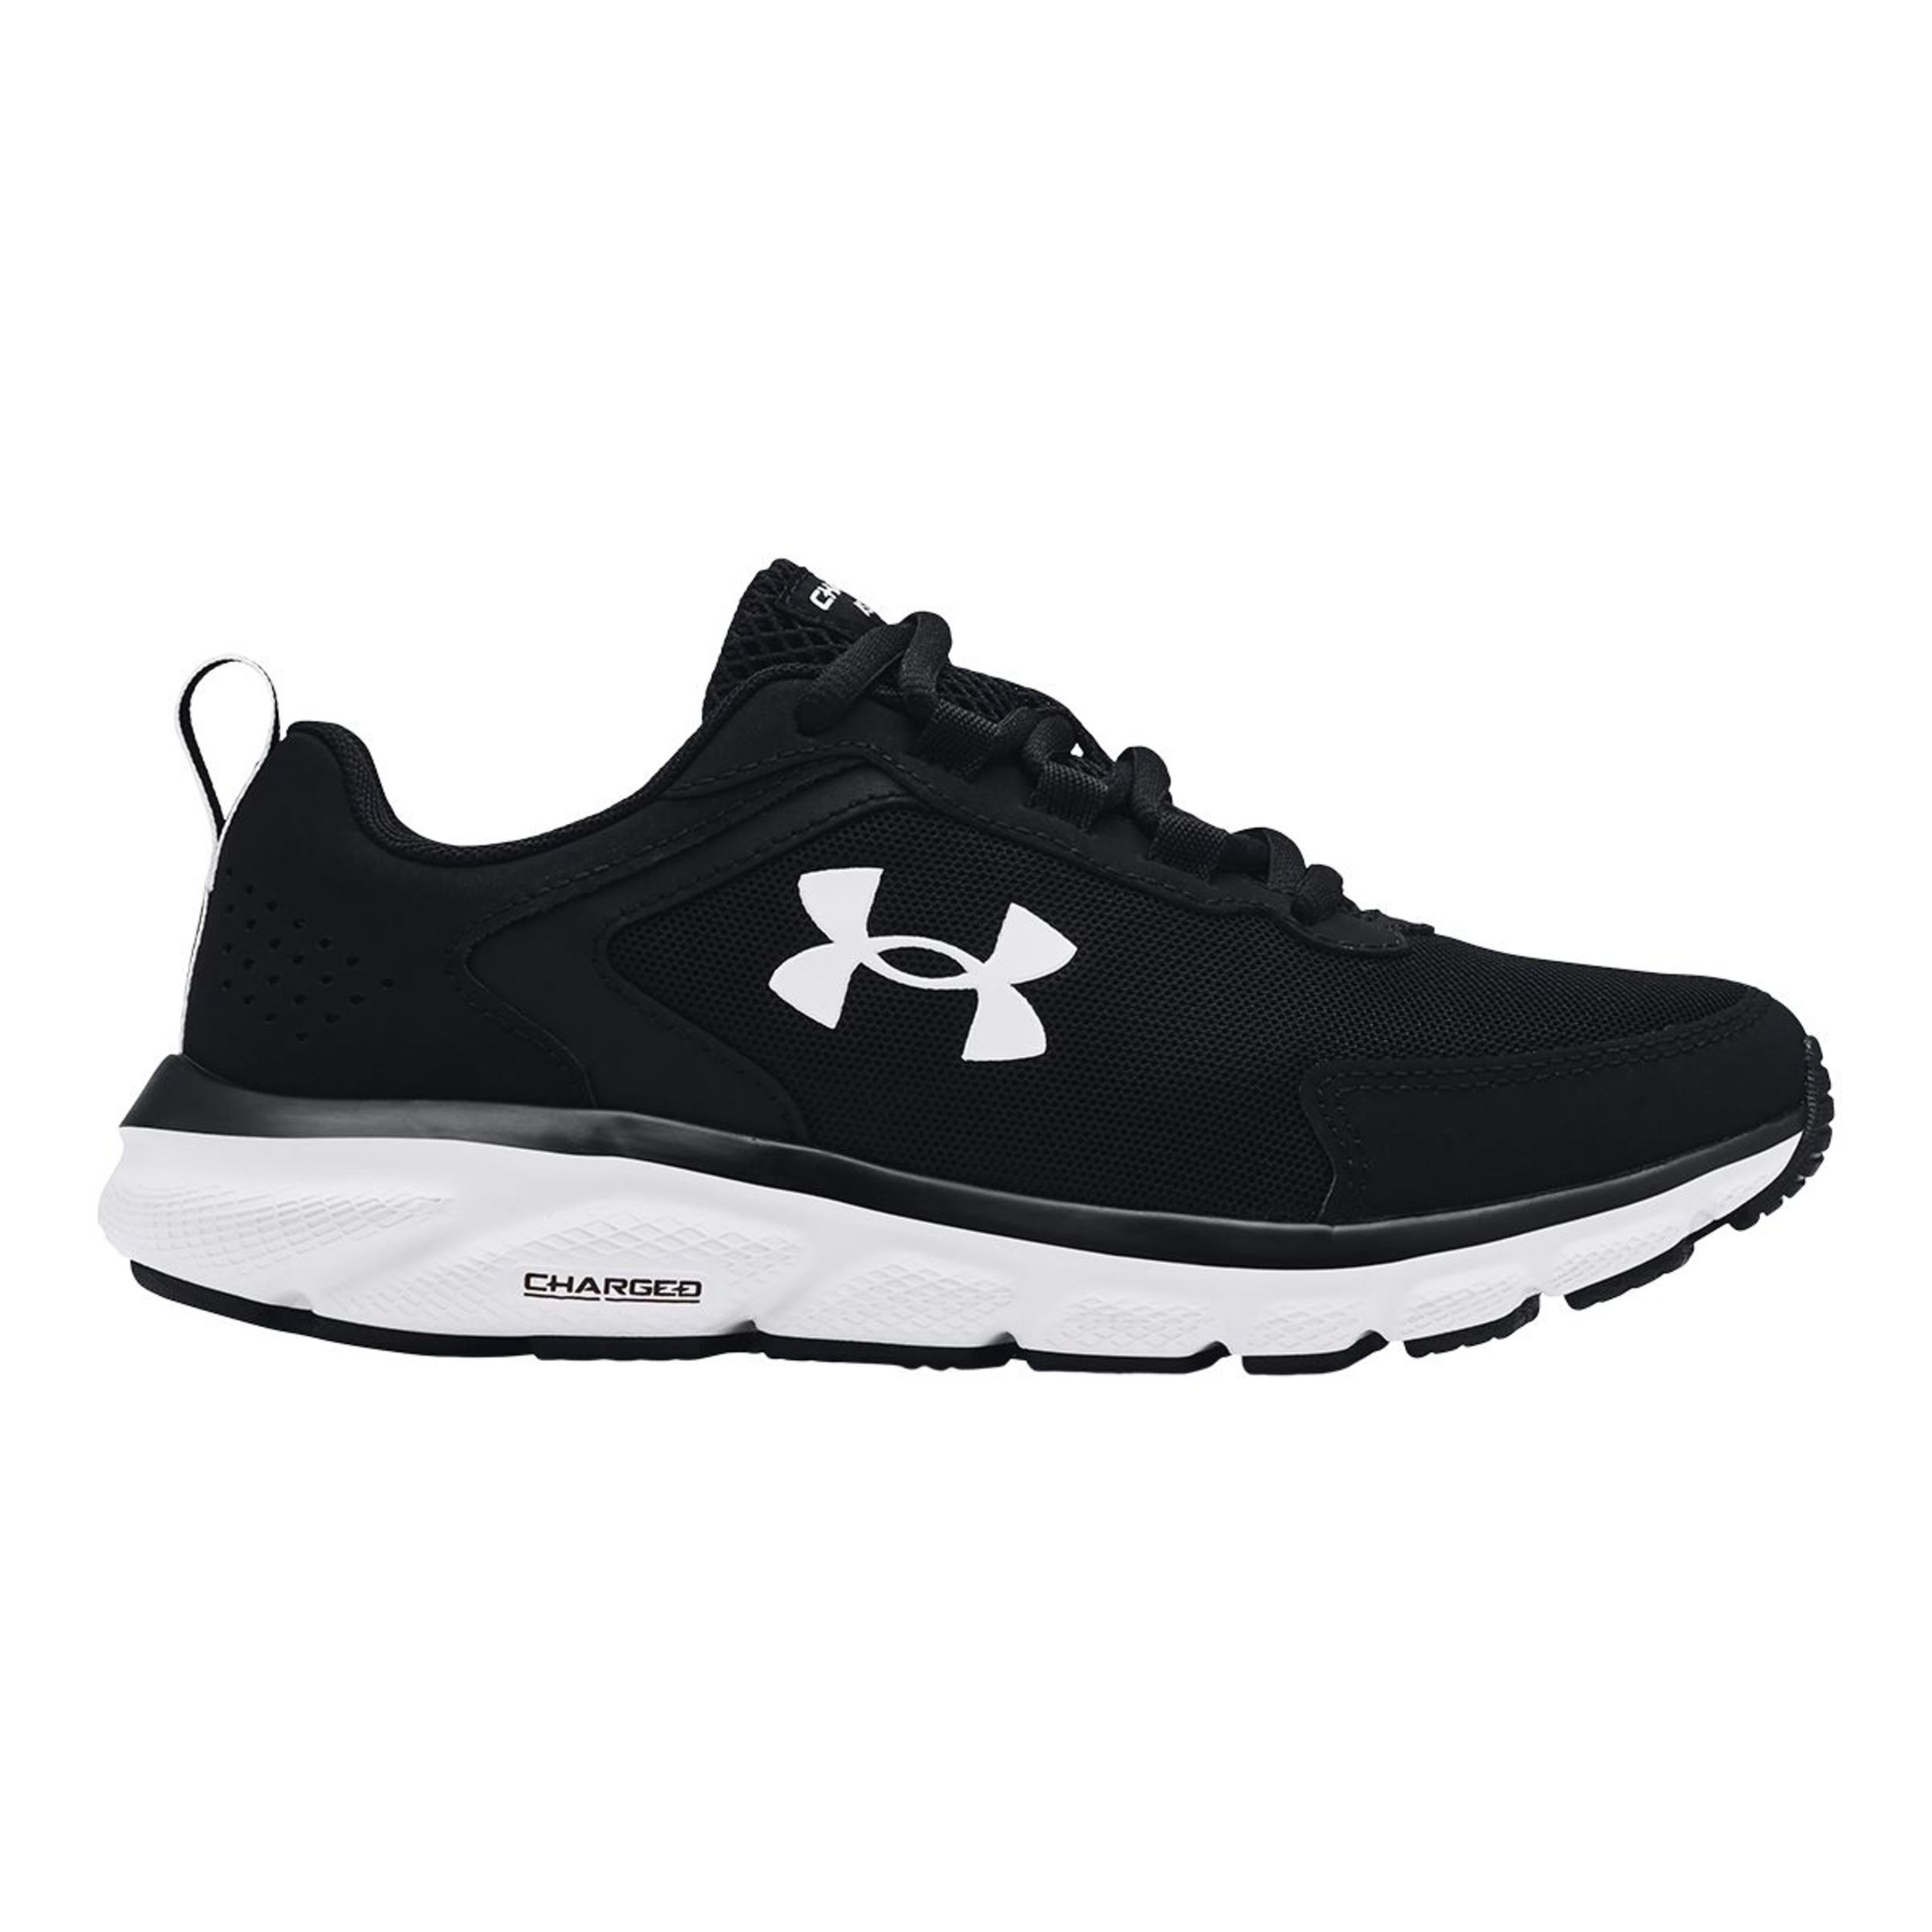 Under Armour Women's Charged Assert 9 Training Shoes, Wide Width ...